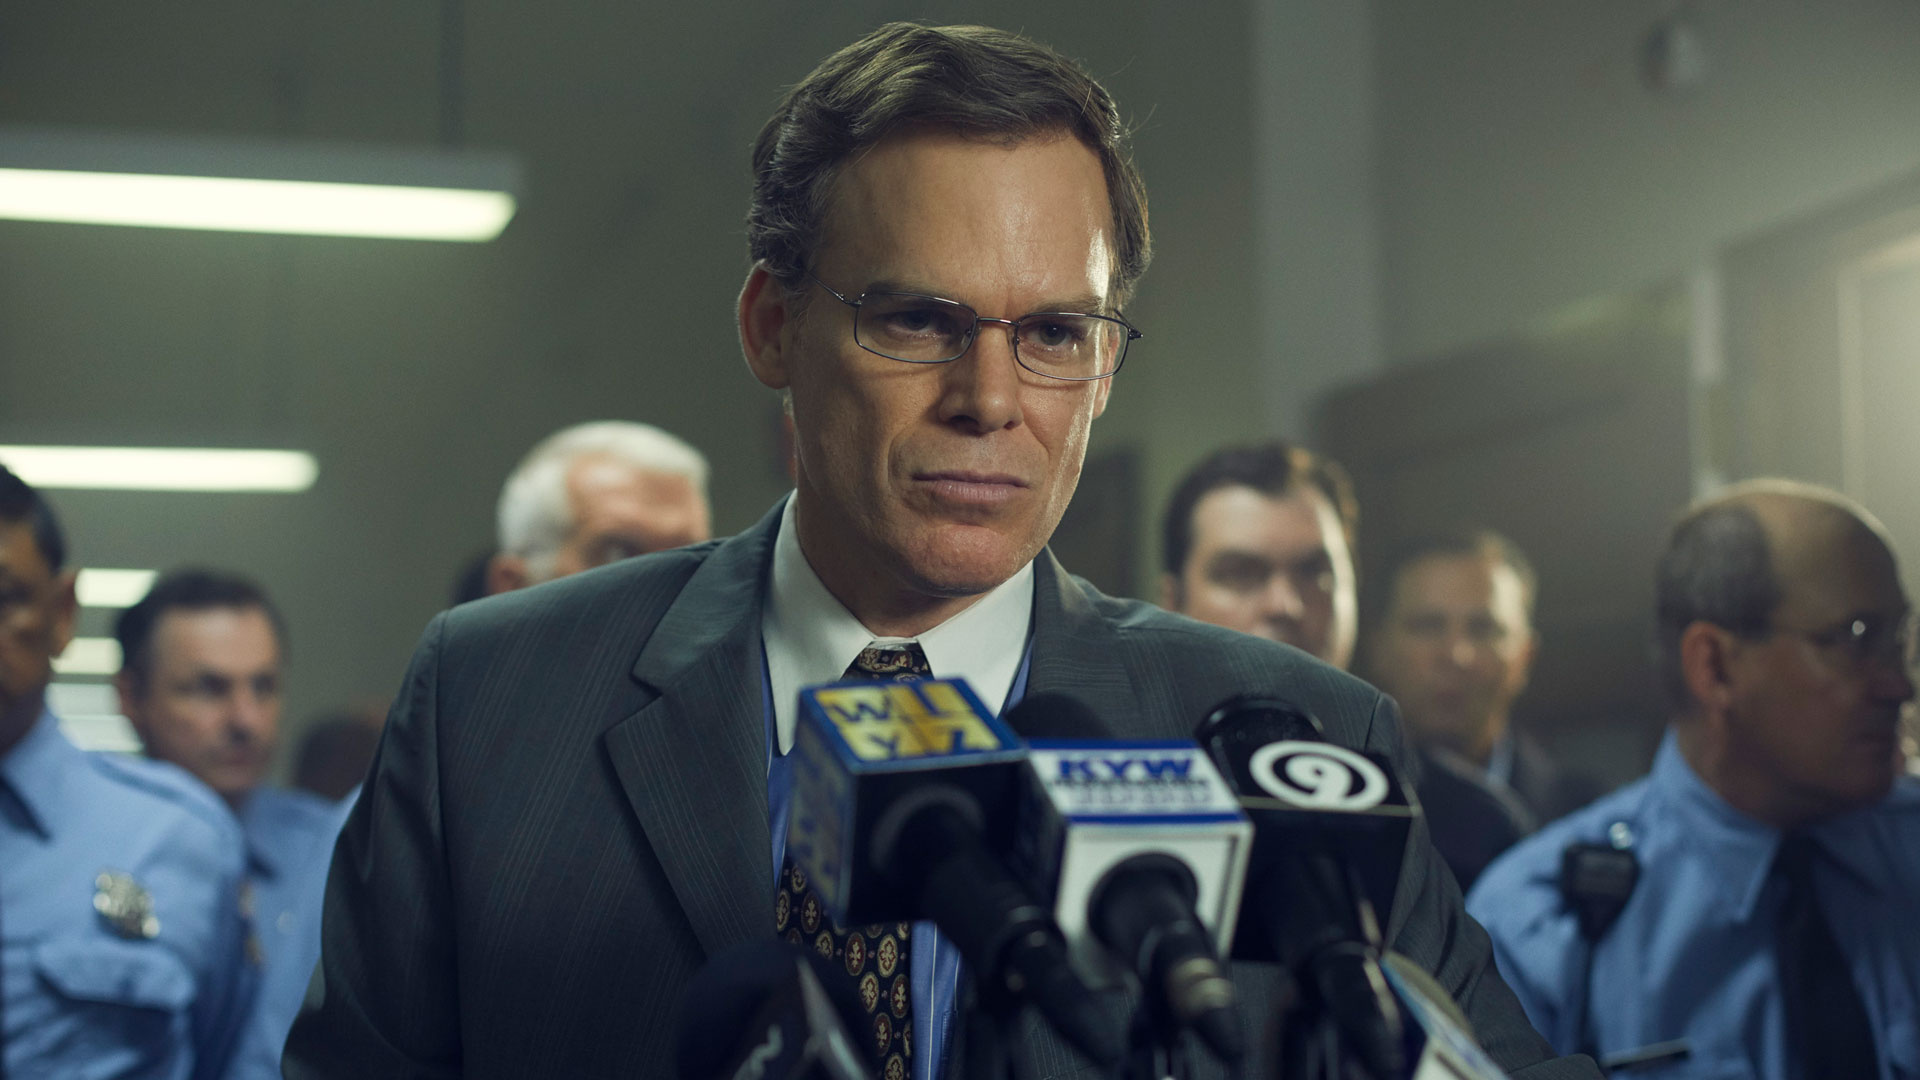 Michael C. Hall: Played Thomas Eastman in a 2019 American political drama film, The Report. 1920x1080 Full HD Wallpaper.